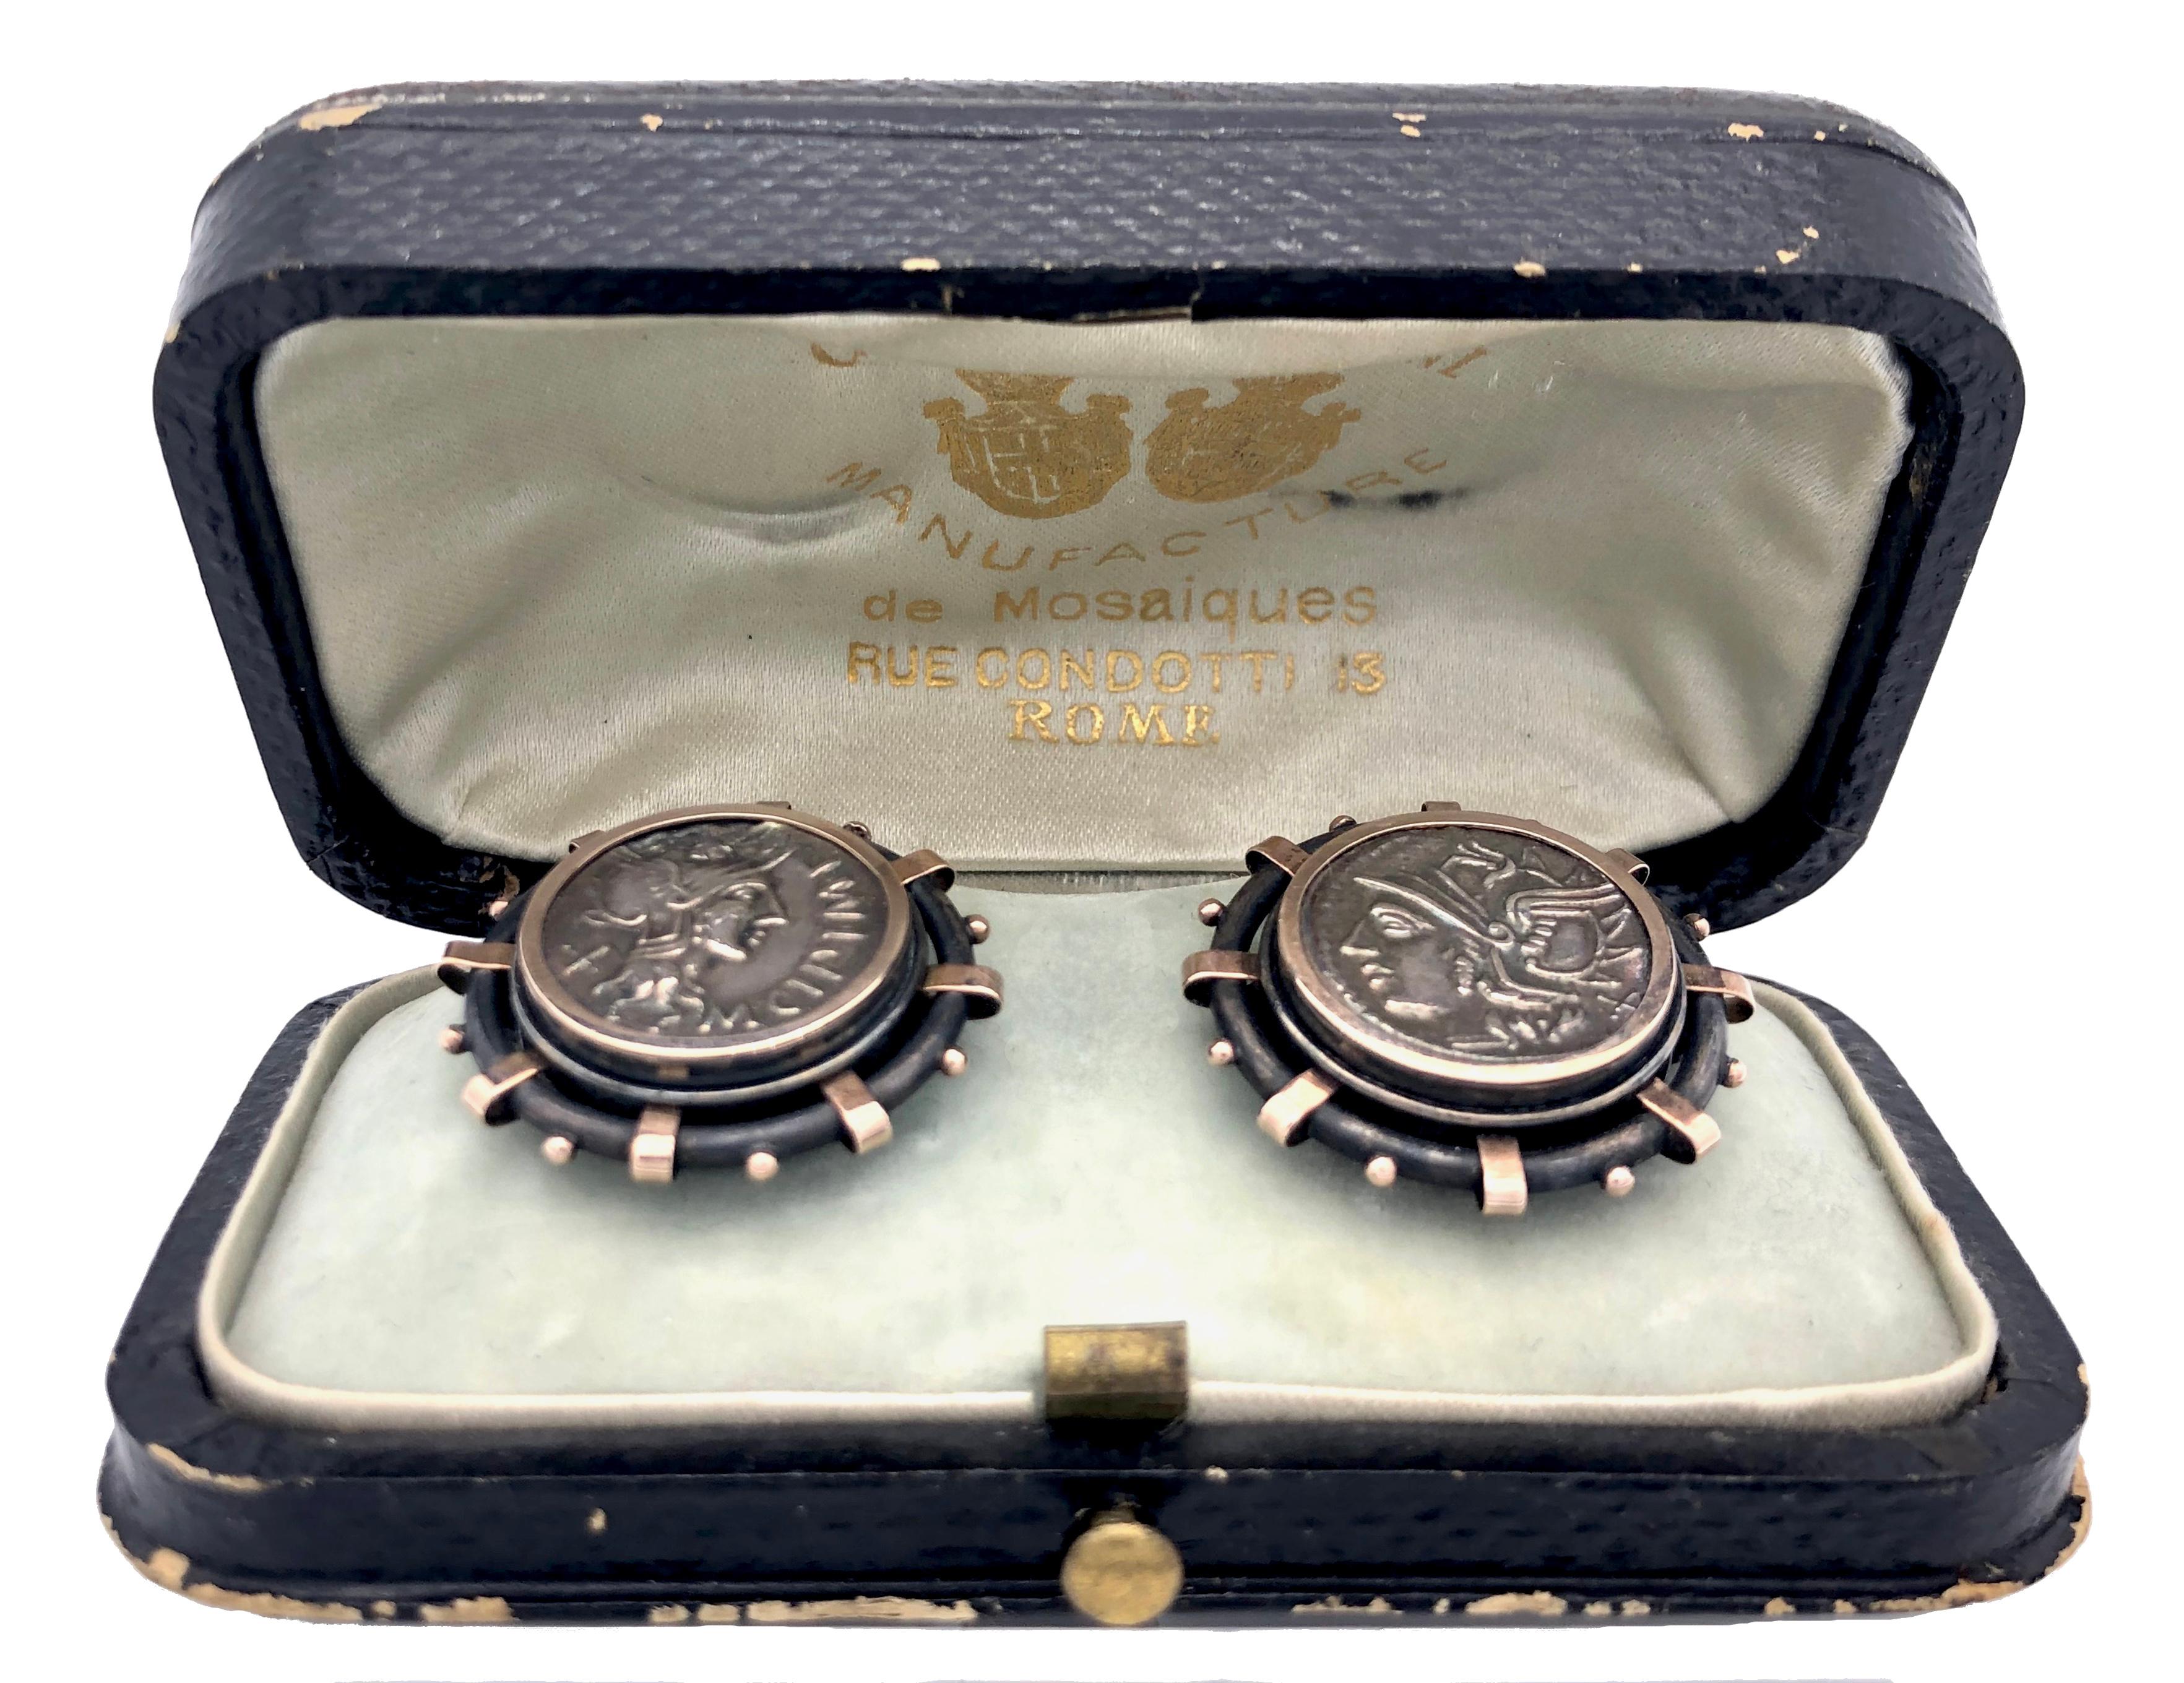 This highly unusual and very rare pair of cufflinks is executed in the archaeological style by the jewellers G.Roccheggiani of Via Condotti 19, Rome.
Antique coins are set in silver mounts, partially blackened and highlighted with rose gold.
A